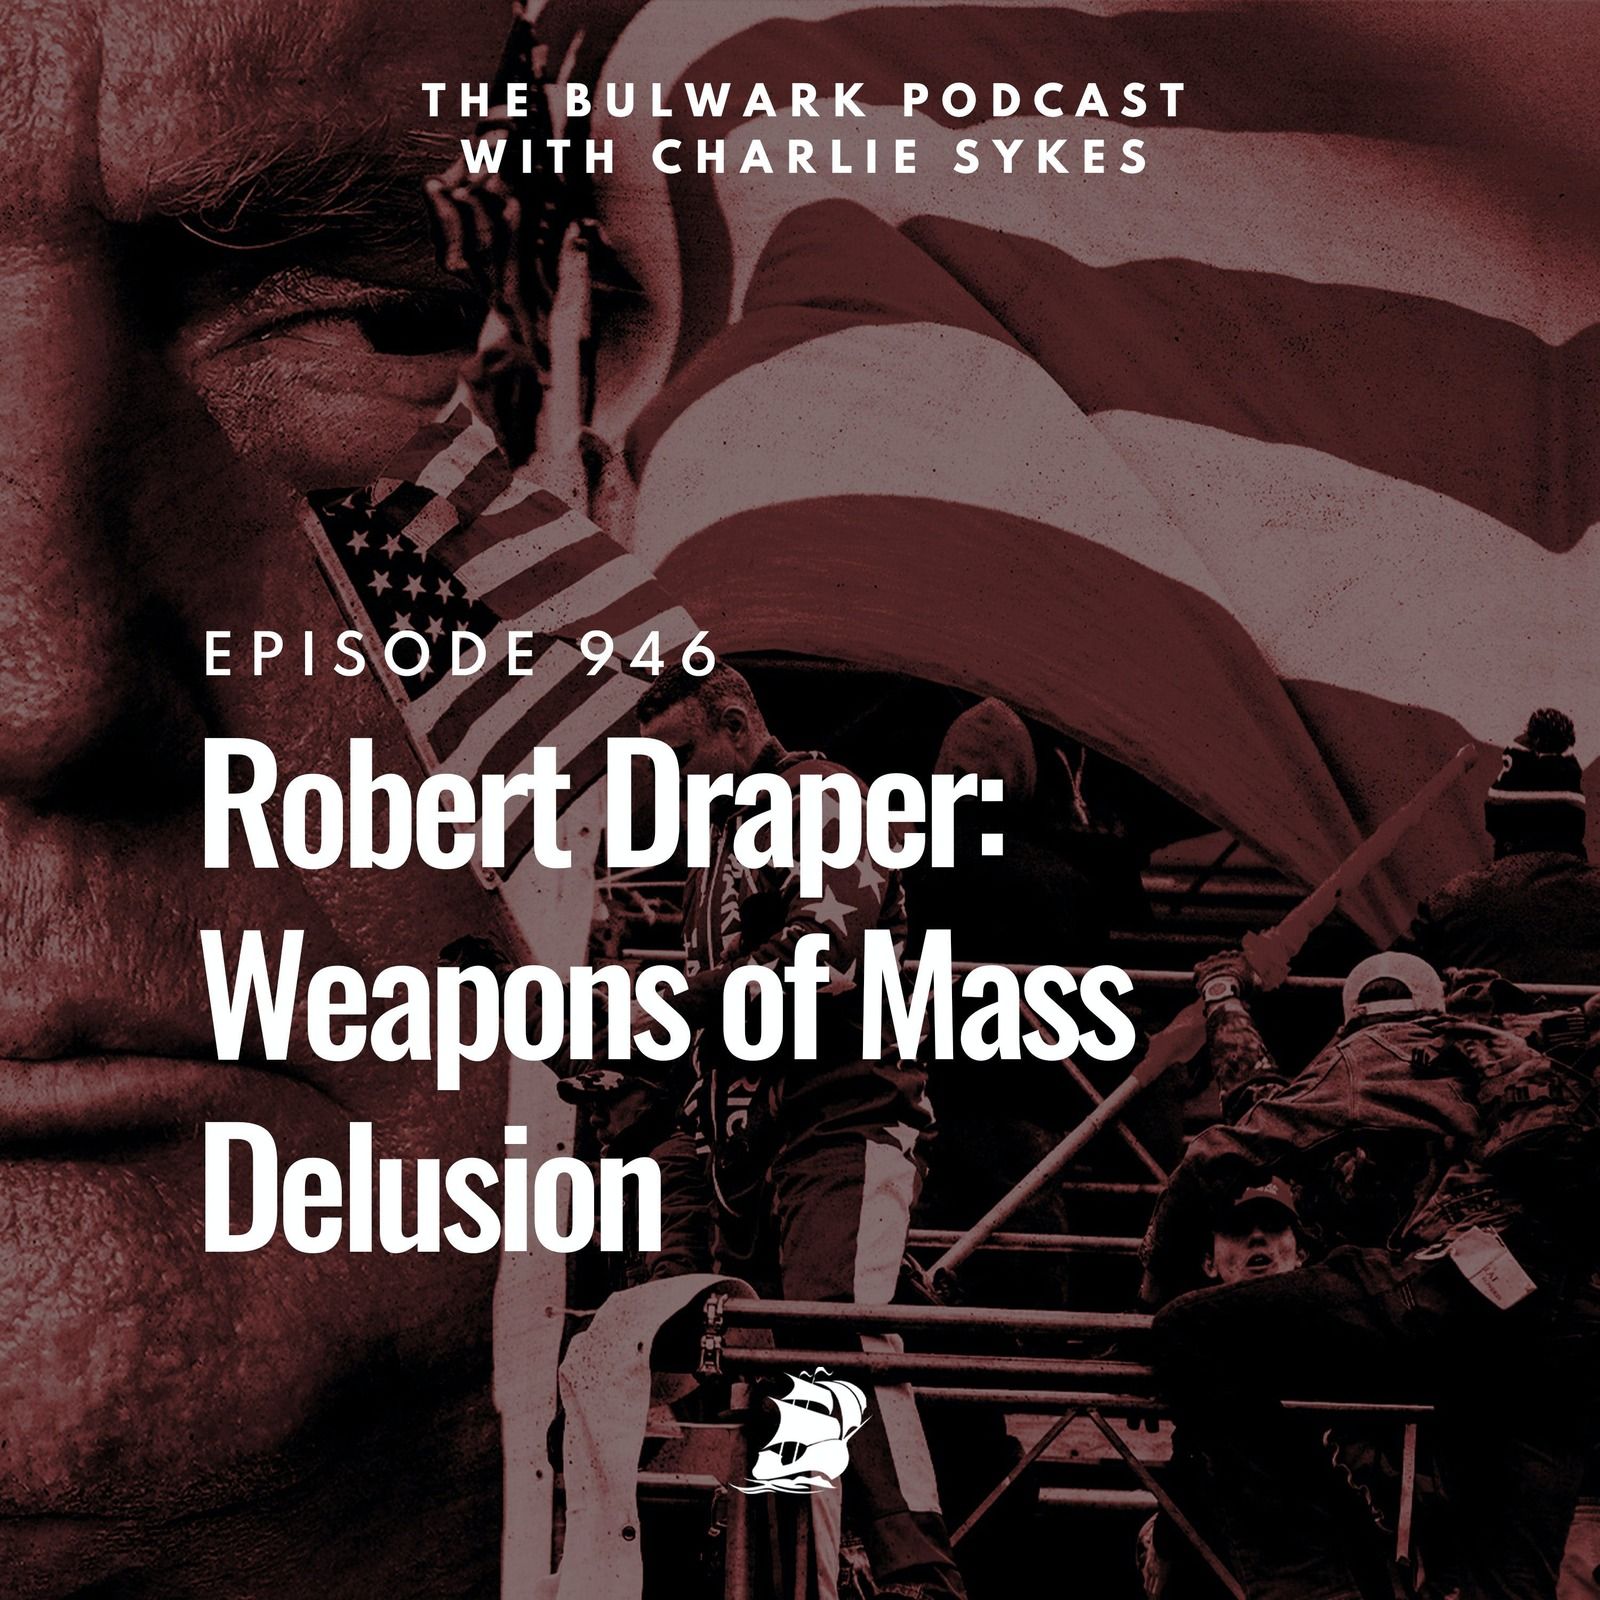 Robert Draper: Weapons of Mass Delusion by The Bulwark Podcast